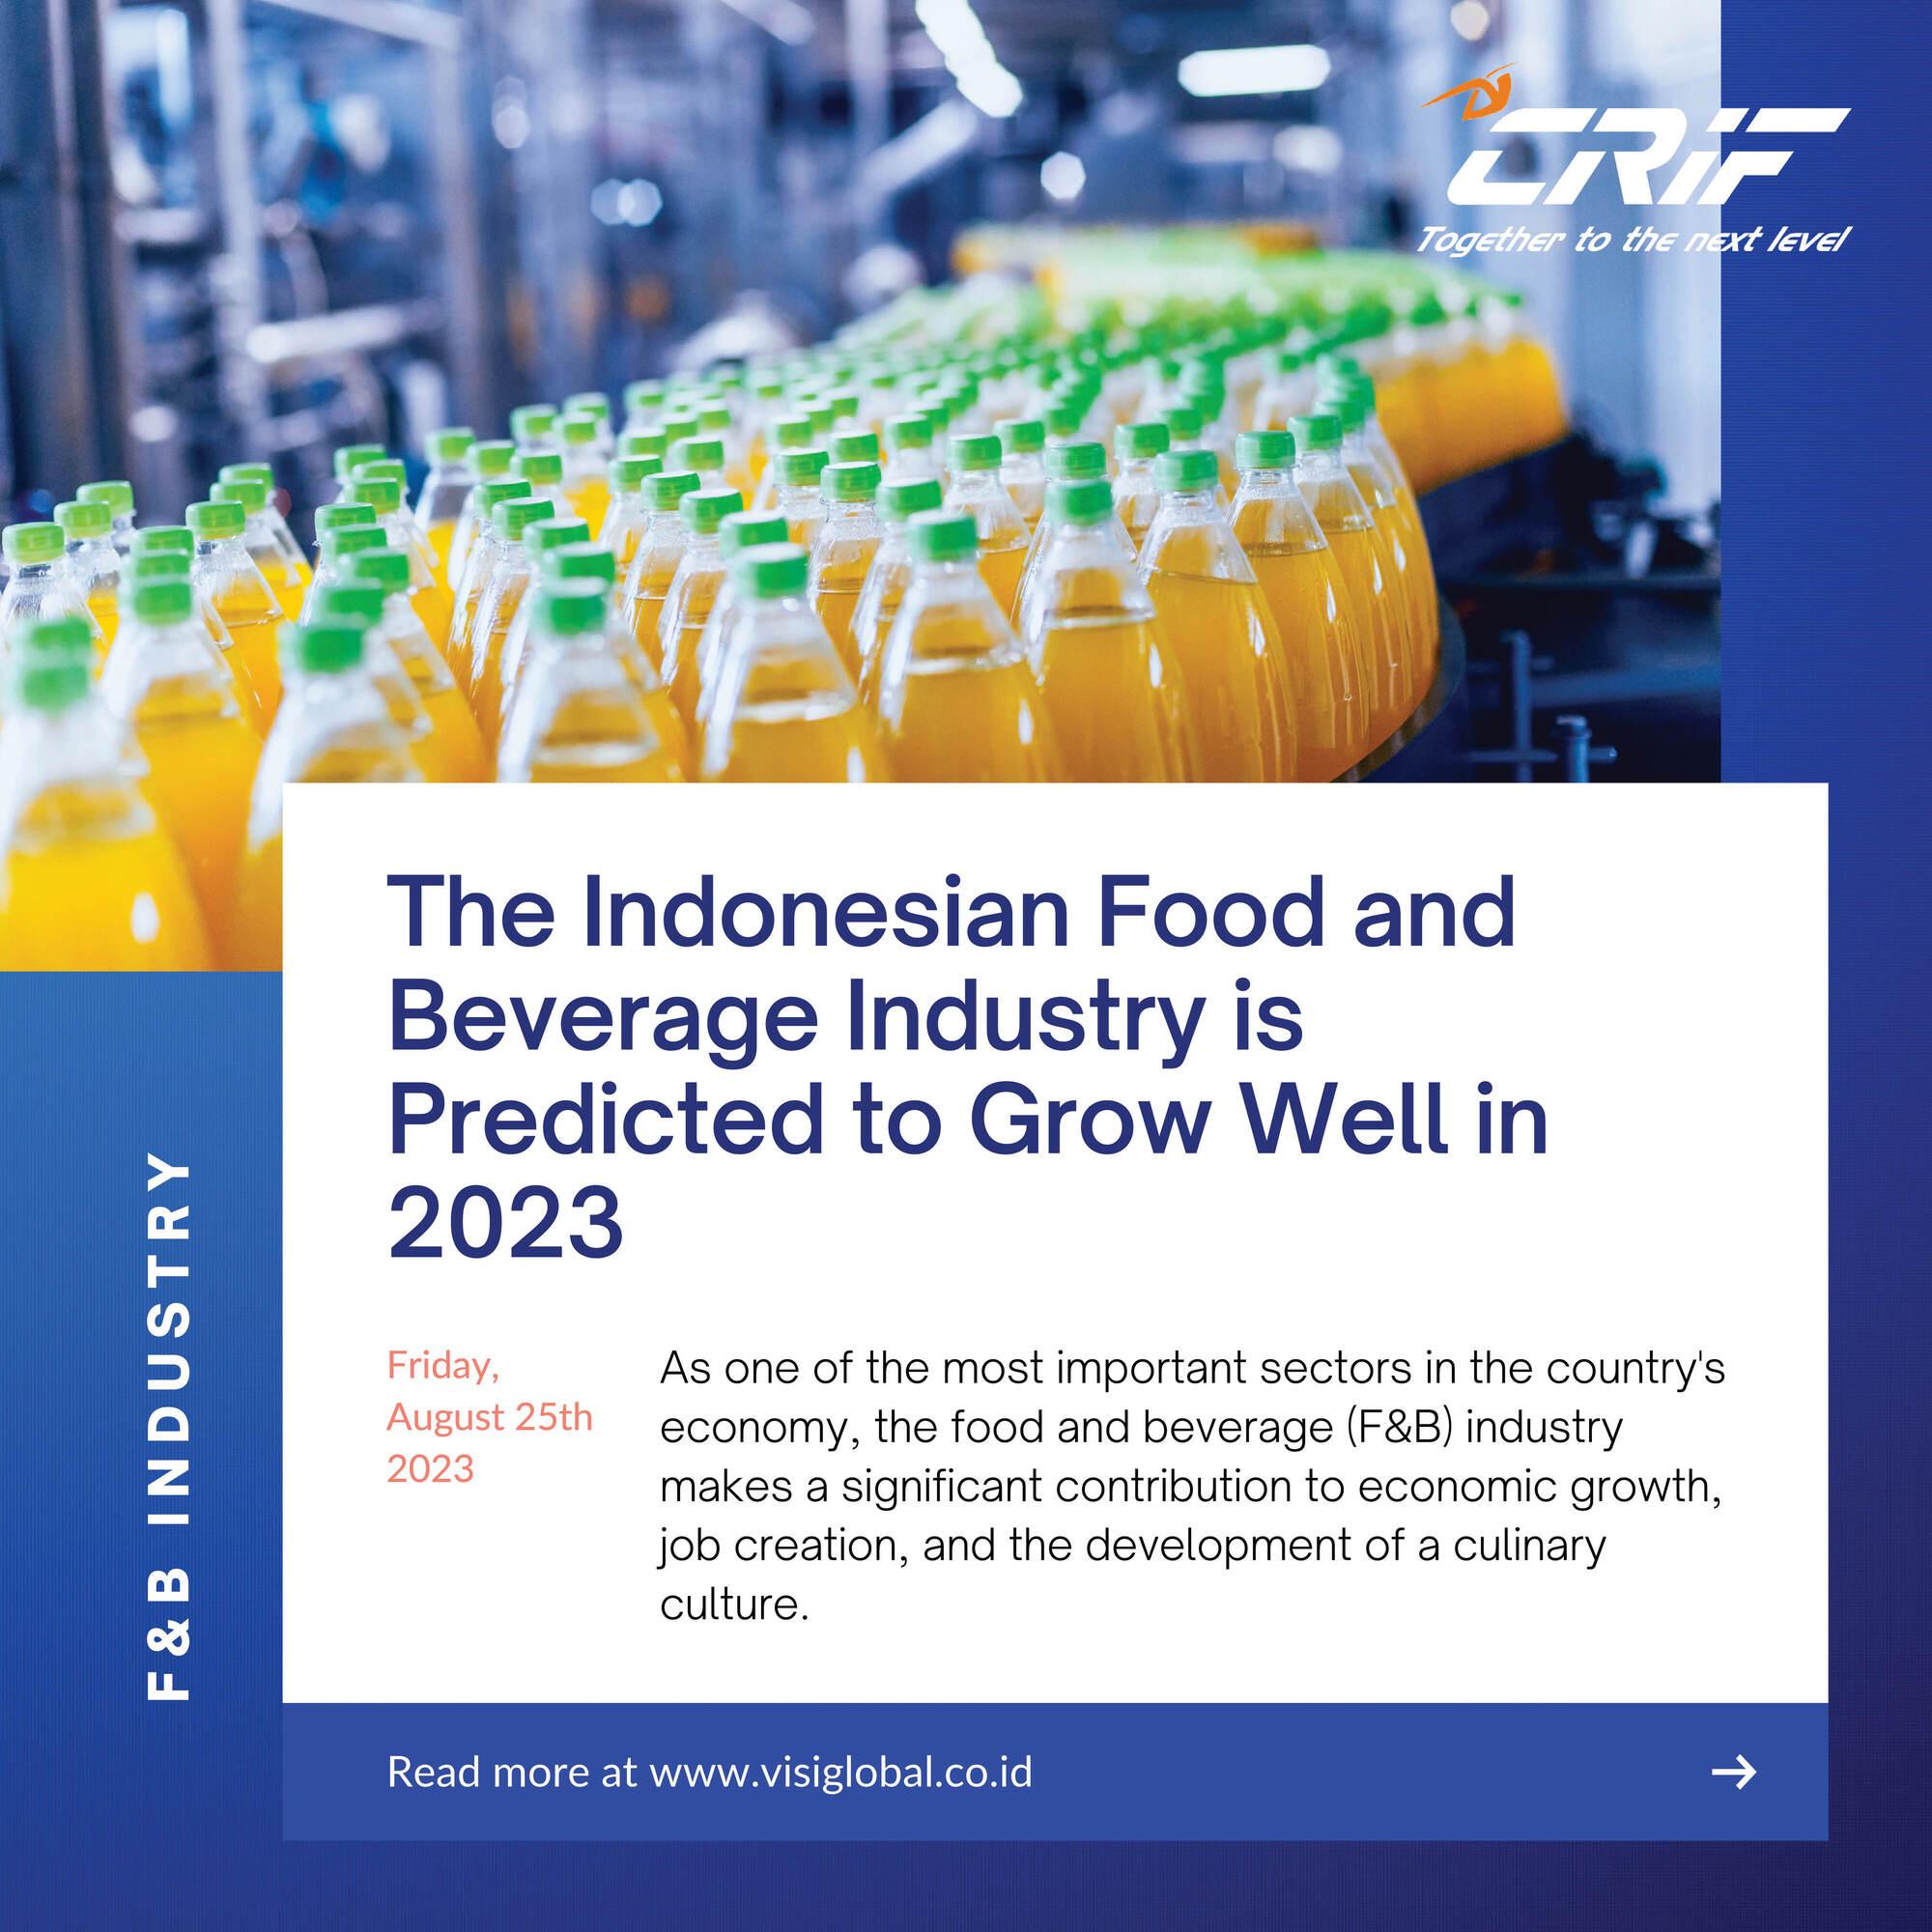 The Indonesian Food and Beverage Industry is Predicted to Grow Well in 2023